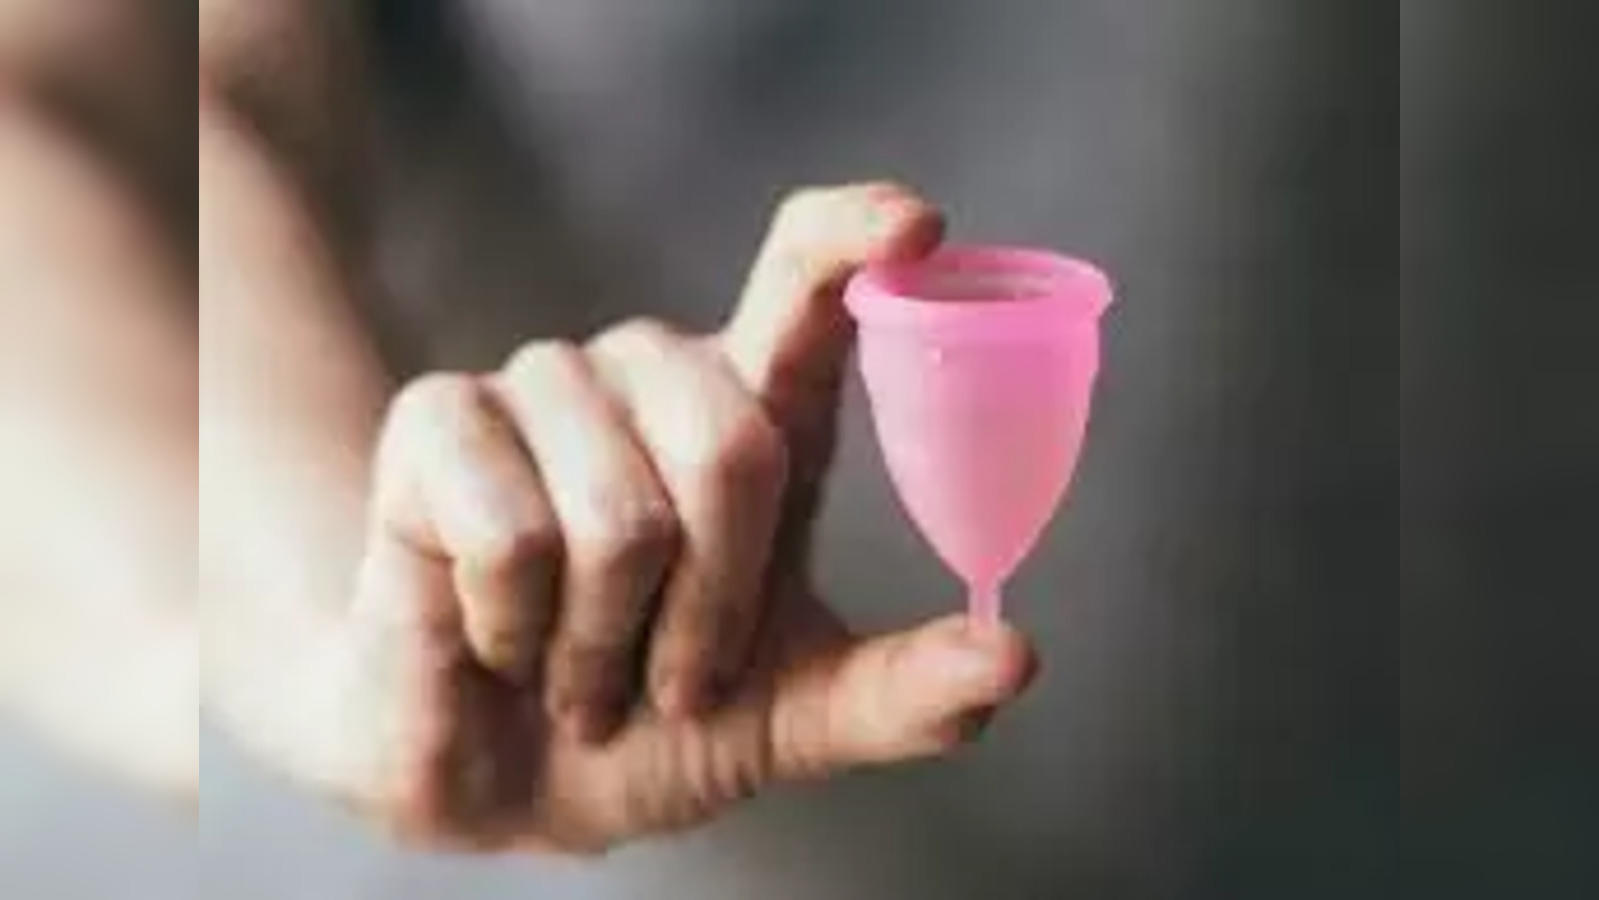 How to use a Menstrual Cup For Beginners? - Pee Safe, how to use menstrual  cup, menstrual, menstrual cup and more